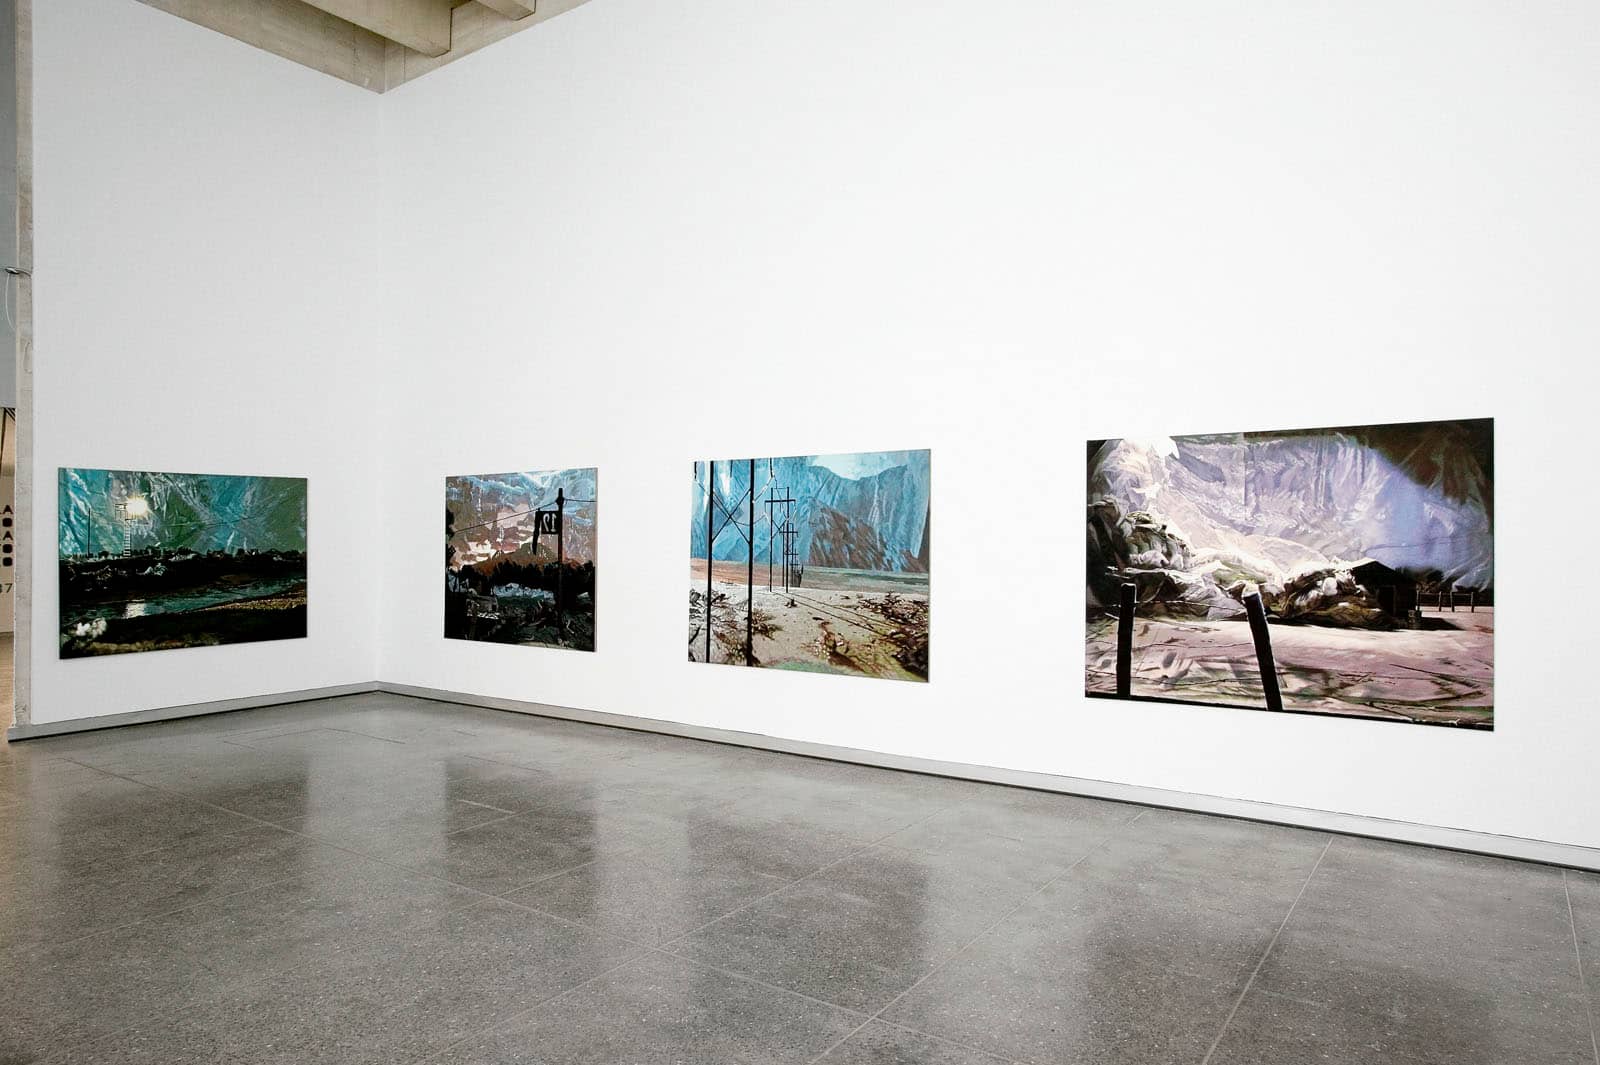 Exhibition view of the solo exhibition "Exvoto, Where is Nikki Black" by Philipp Fröhlich at MUSAC museum in Leon, Spain, curated by Tania Pardo. The image shows four horizontal paintings showing landscapes.